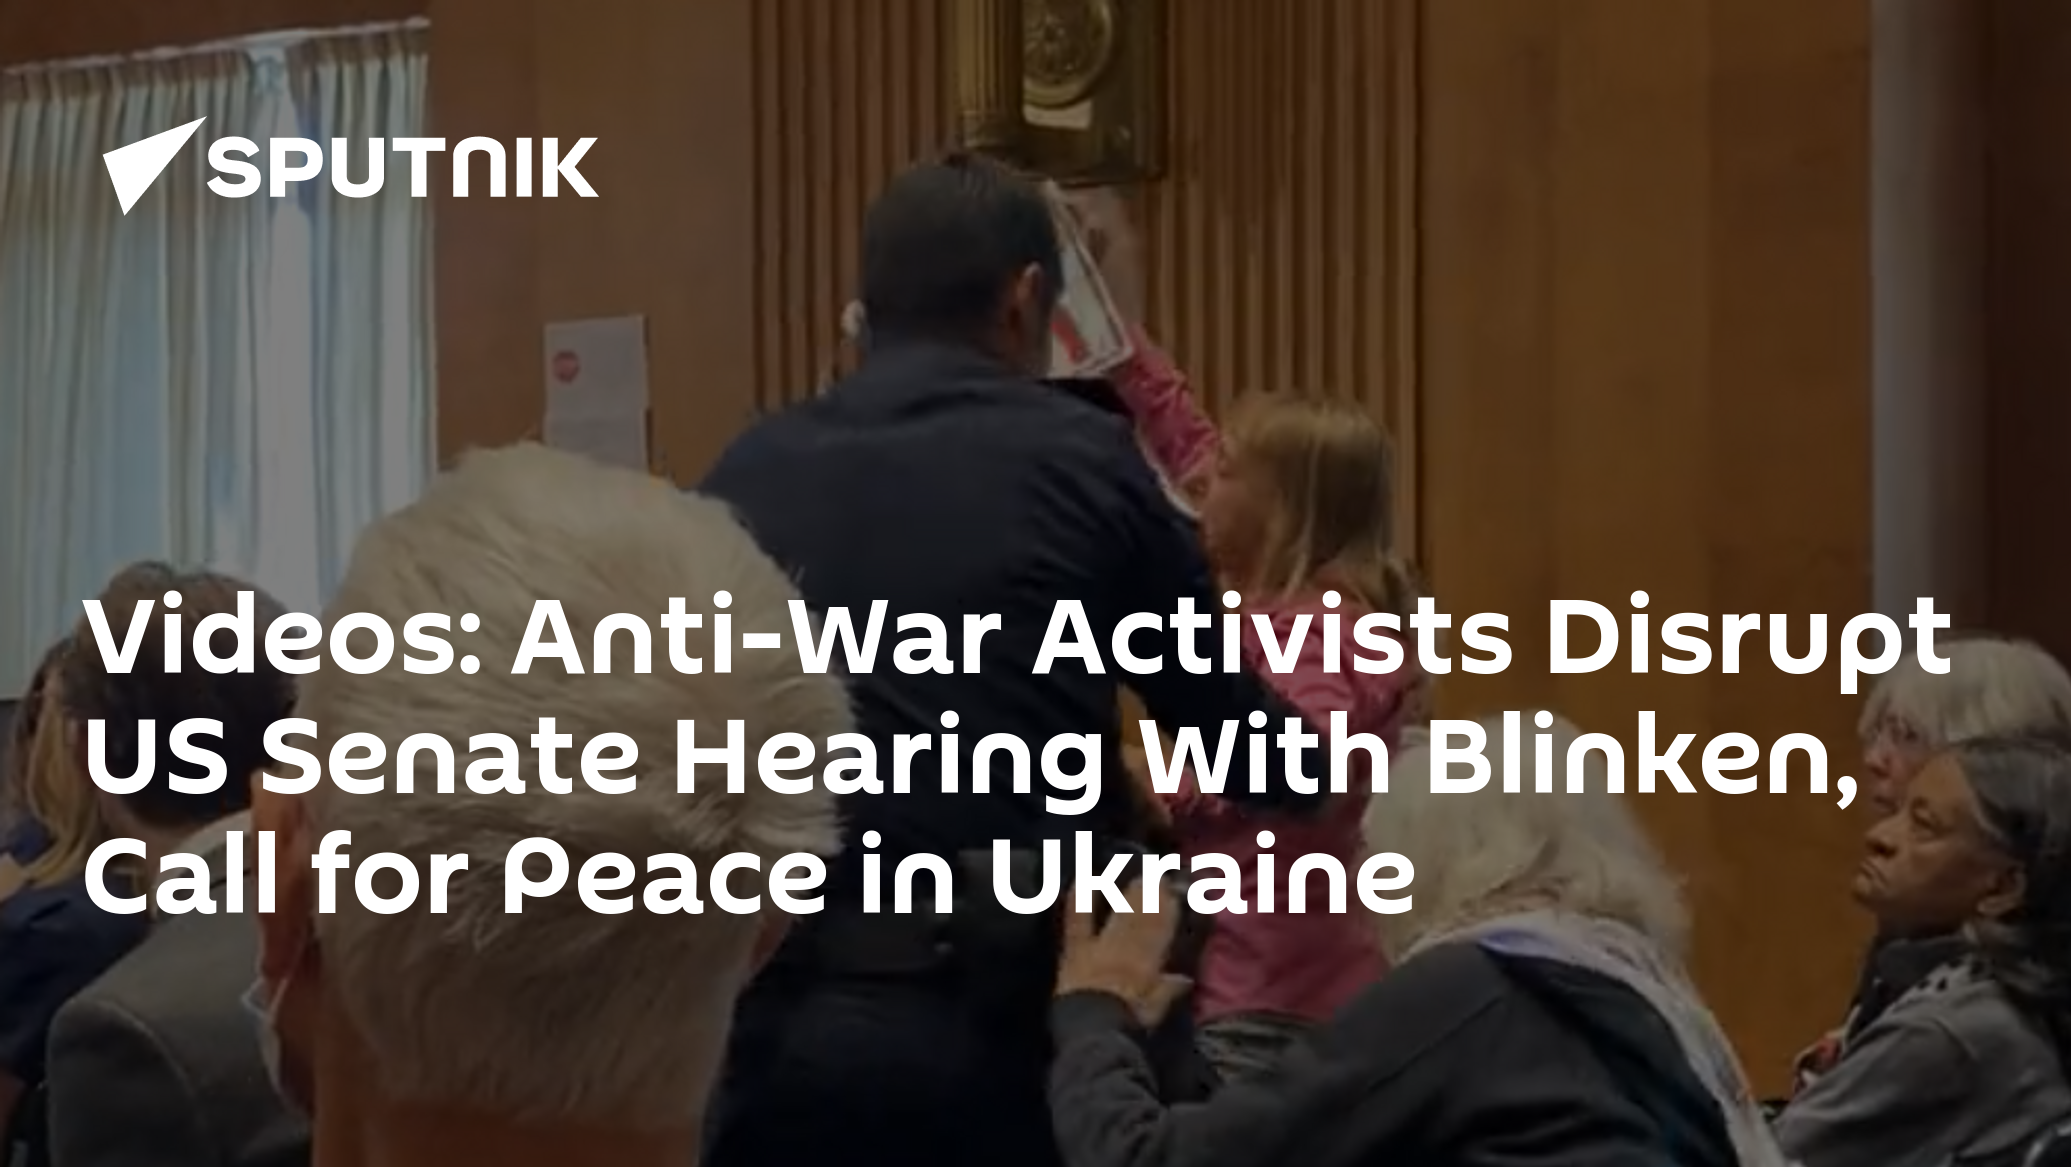 Videos: Anti-War Activists Disrupt US Senate Hearing With Blinken, Call for Peace in Ukraine